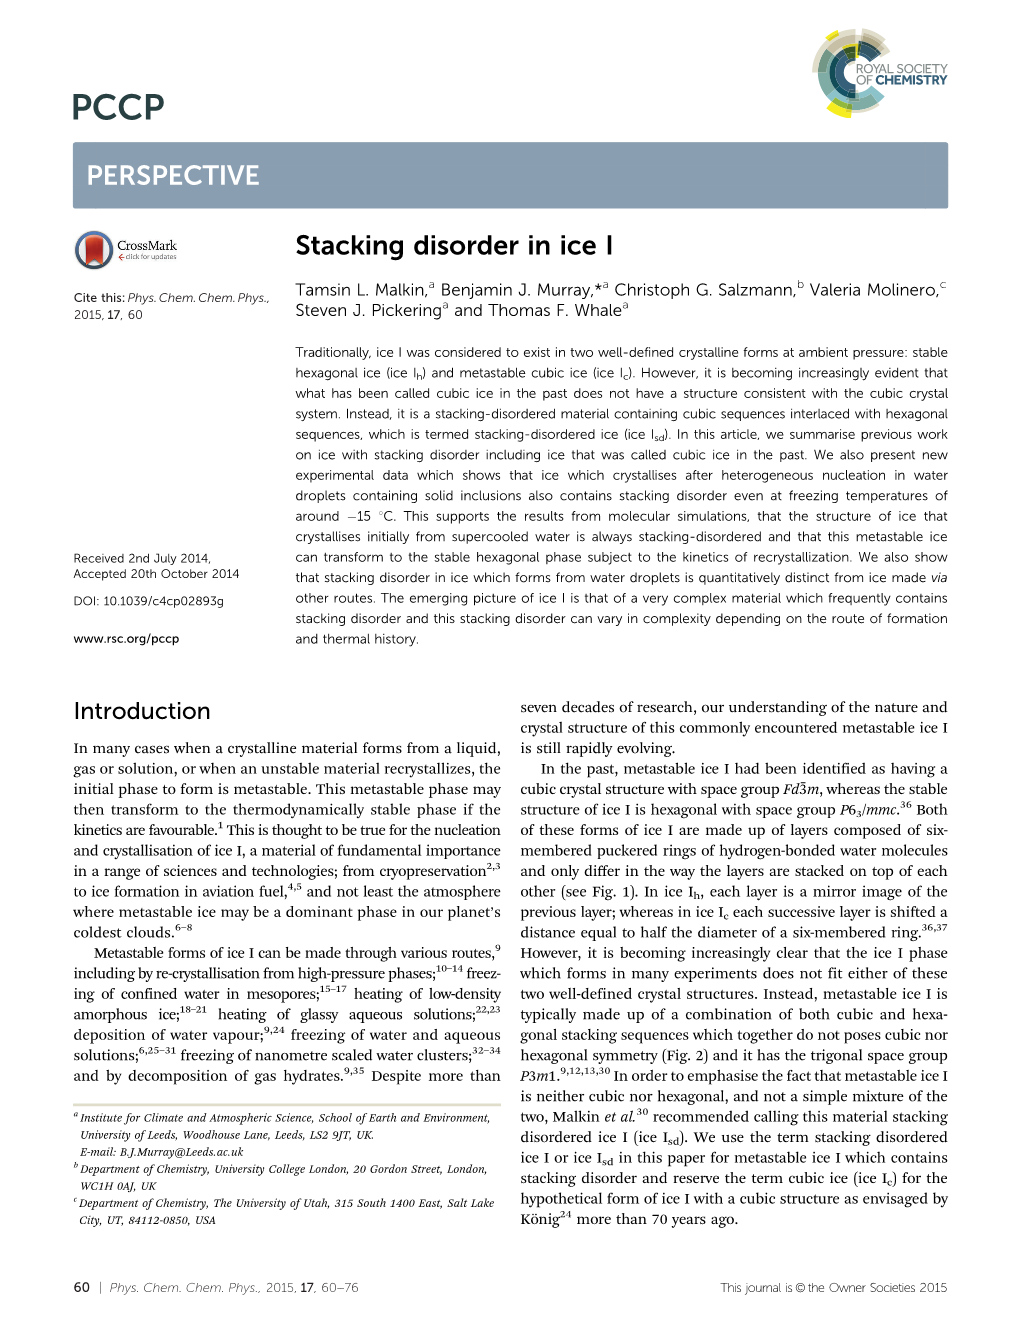 Stacking Disorder in Ice I